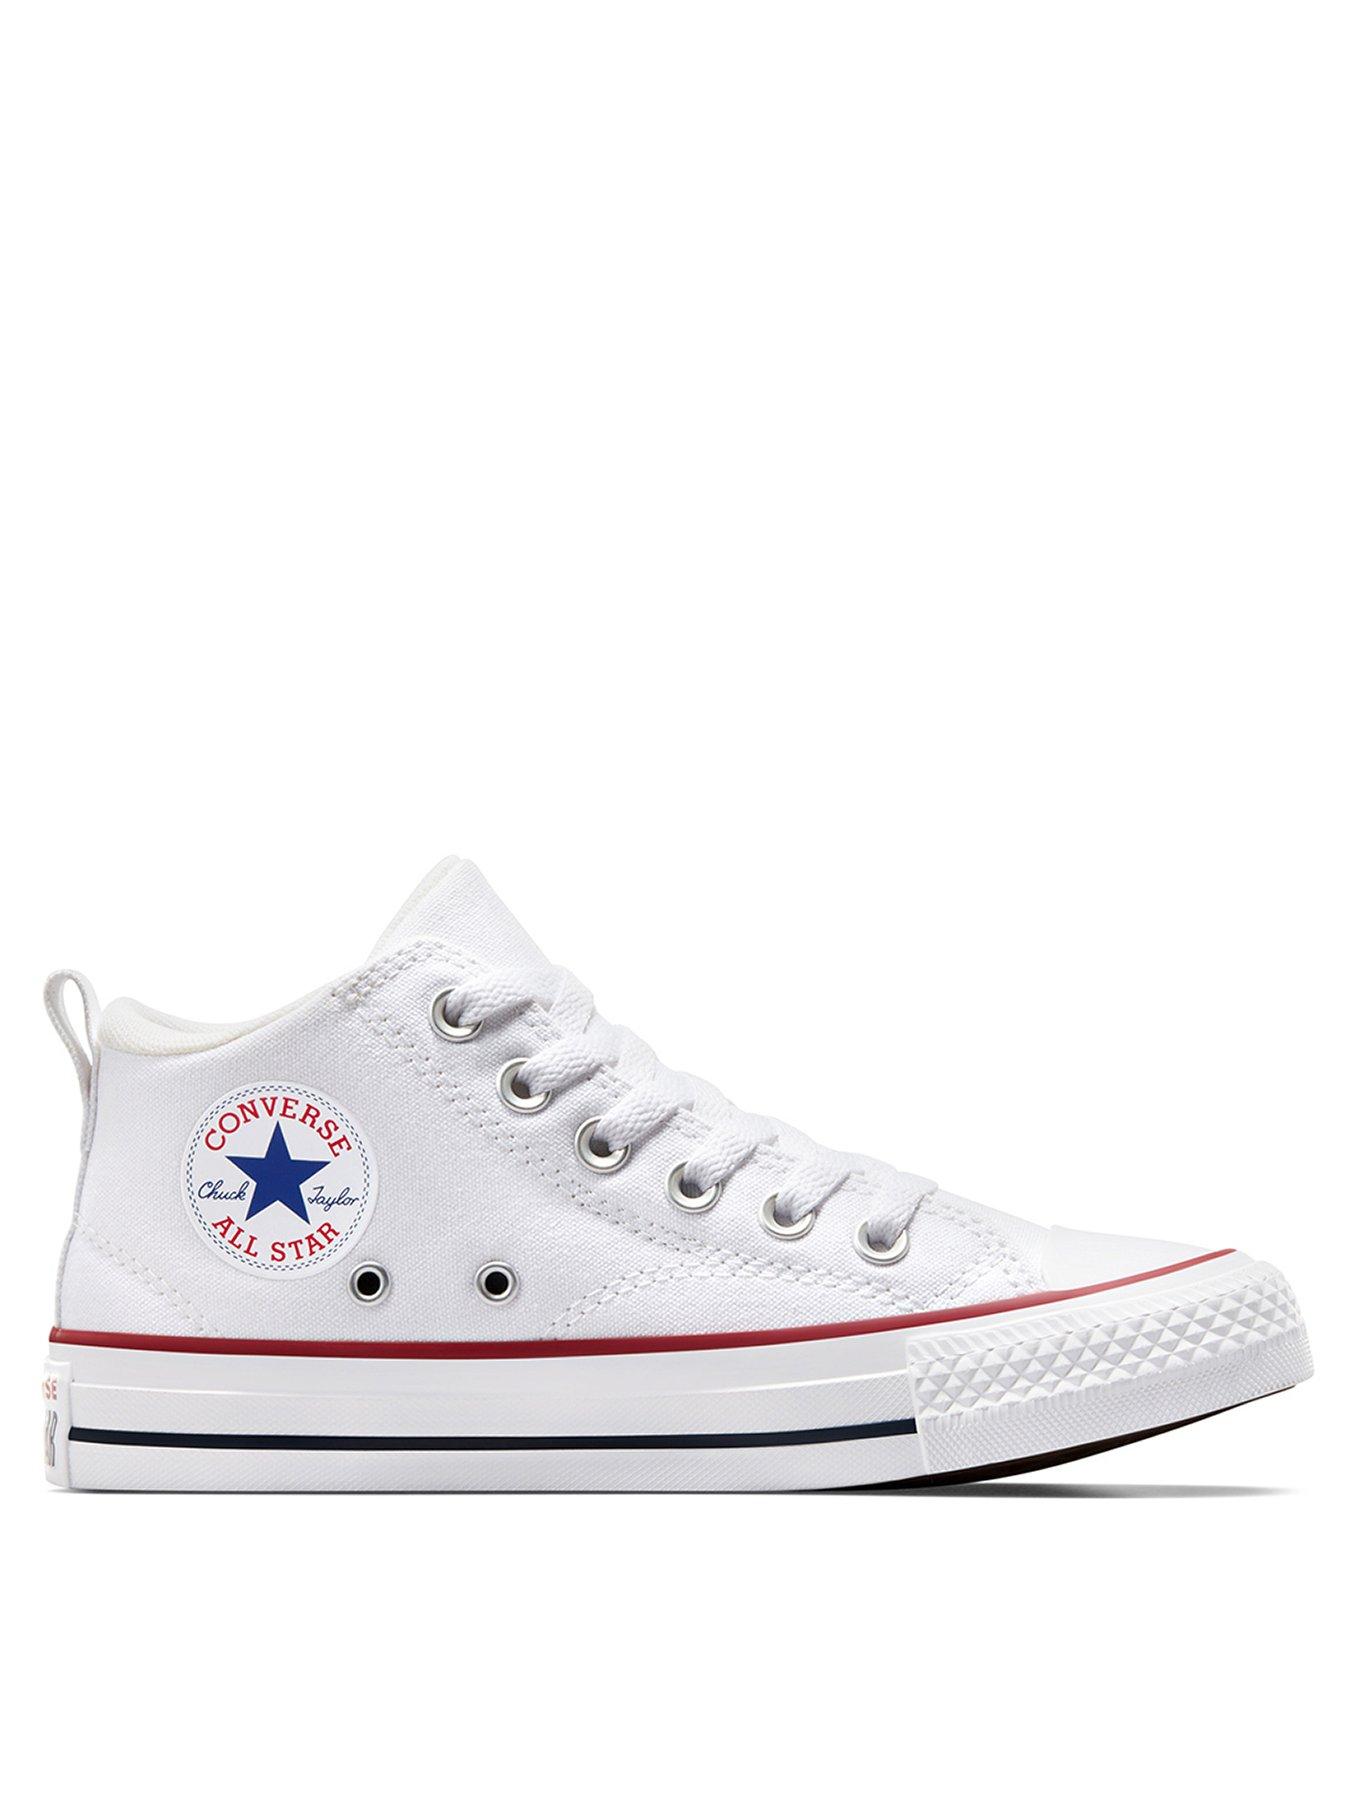 Converse Taylor All Star Malden Trainers - White littlewoods.com